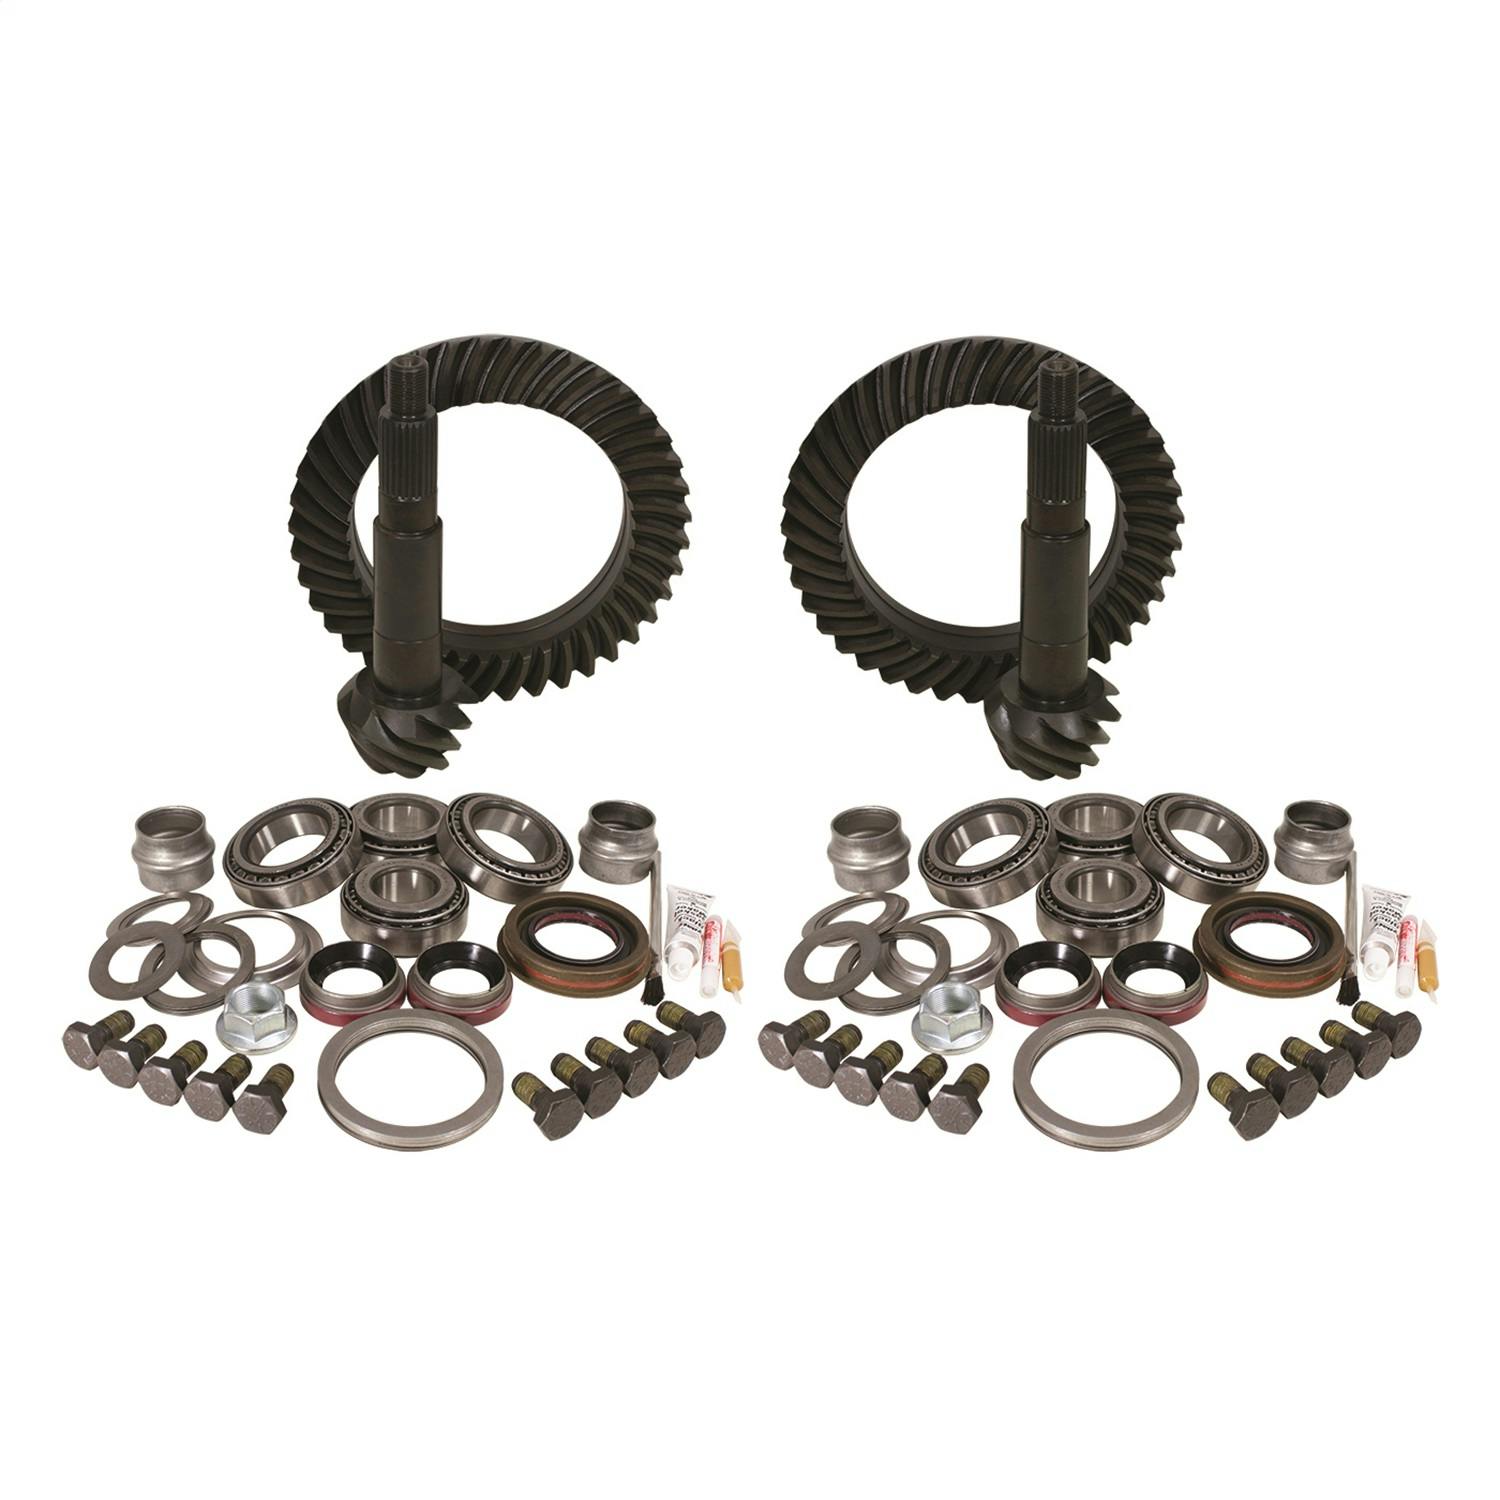 USA Standard Gear ZGK056 Ring And Pinion Set And Complete Install Kit